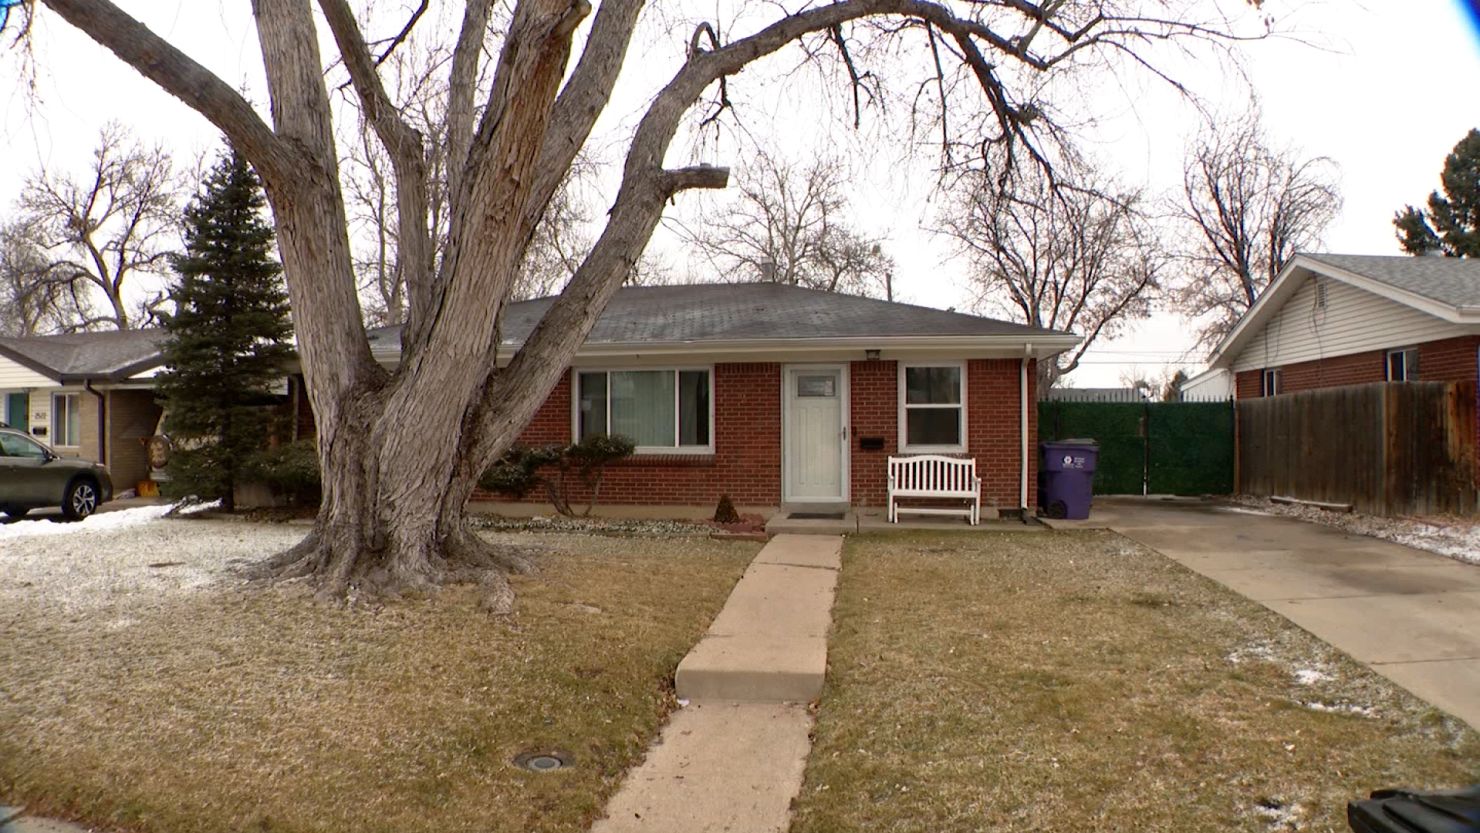 Police told reporters that the human remains were found during an eviction at the Southwest Denver house.